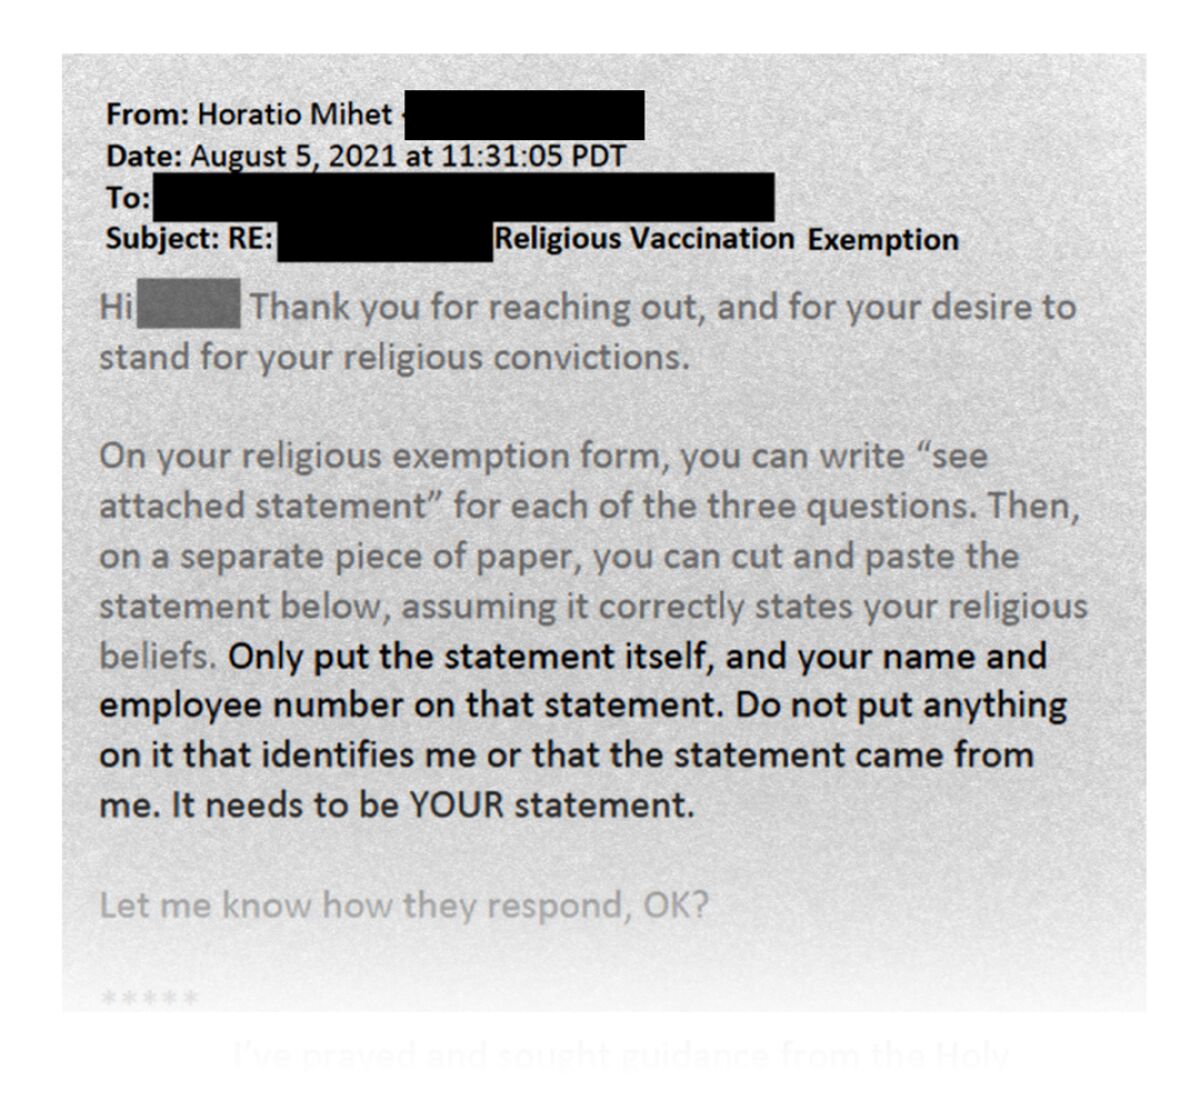 Emails from Horatio Mihet about religious vaccination exemption.